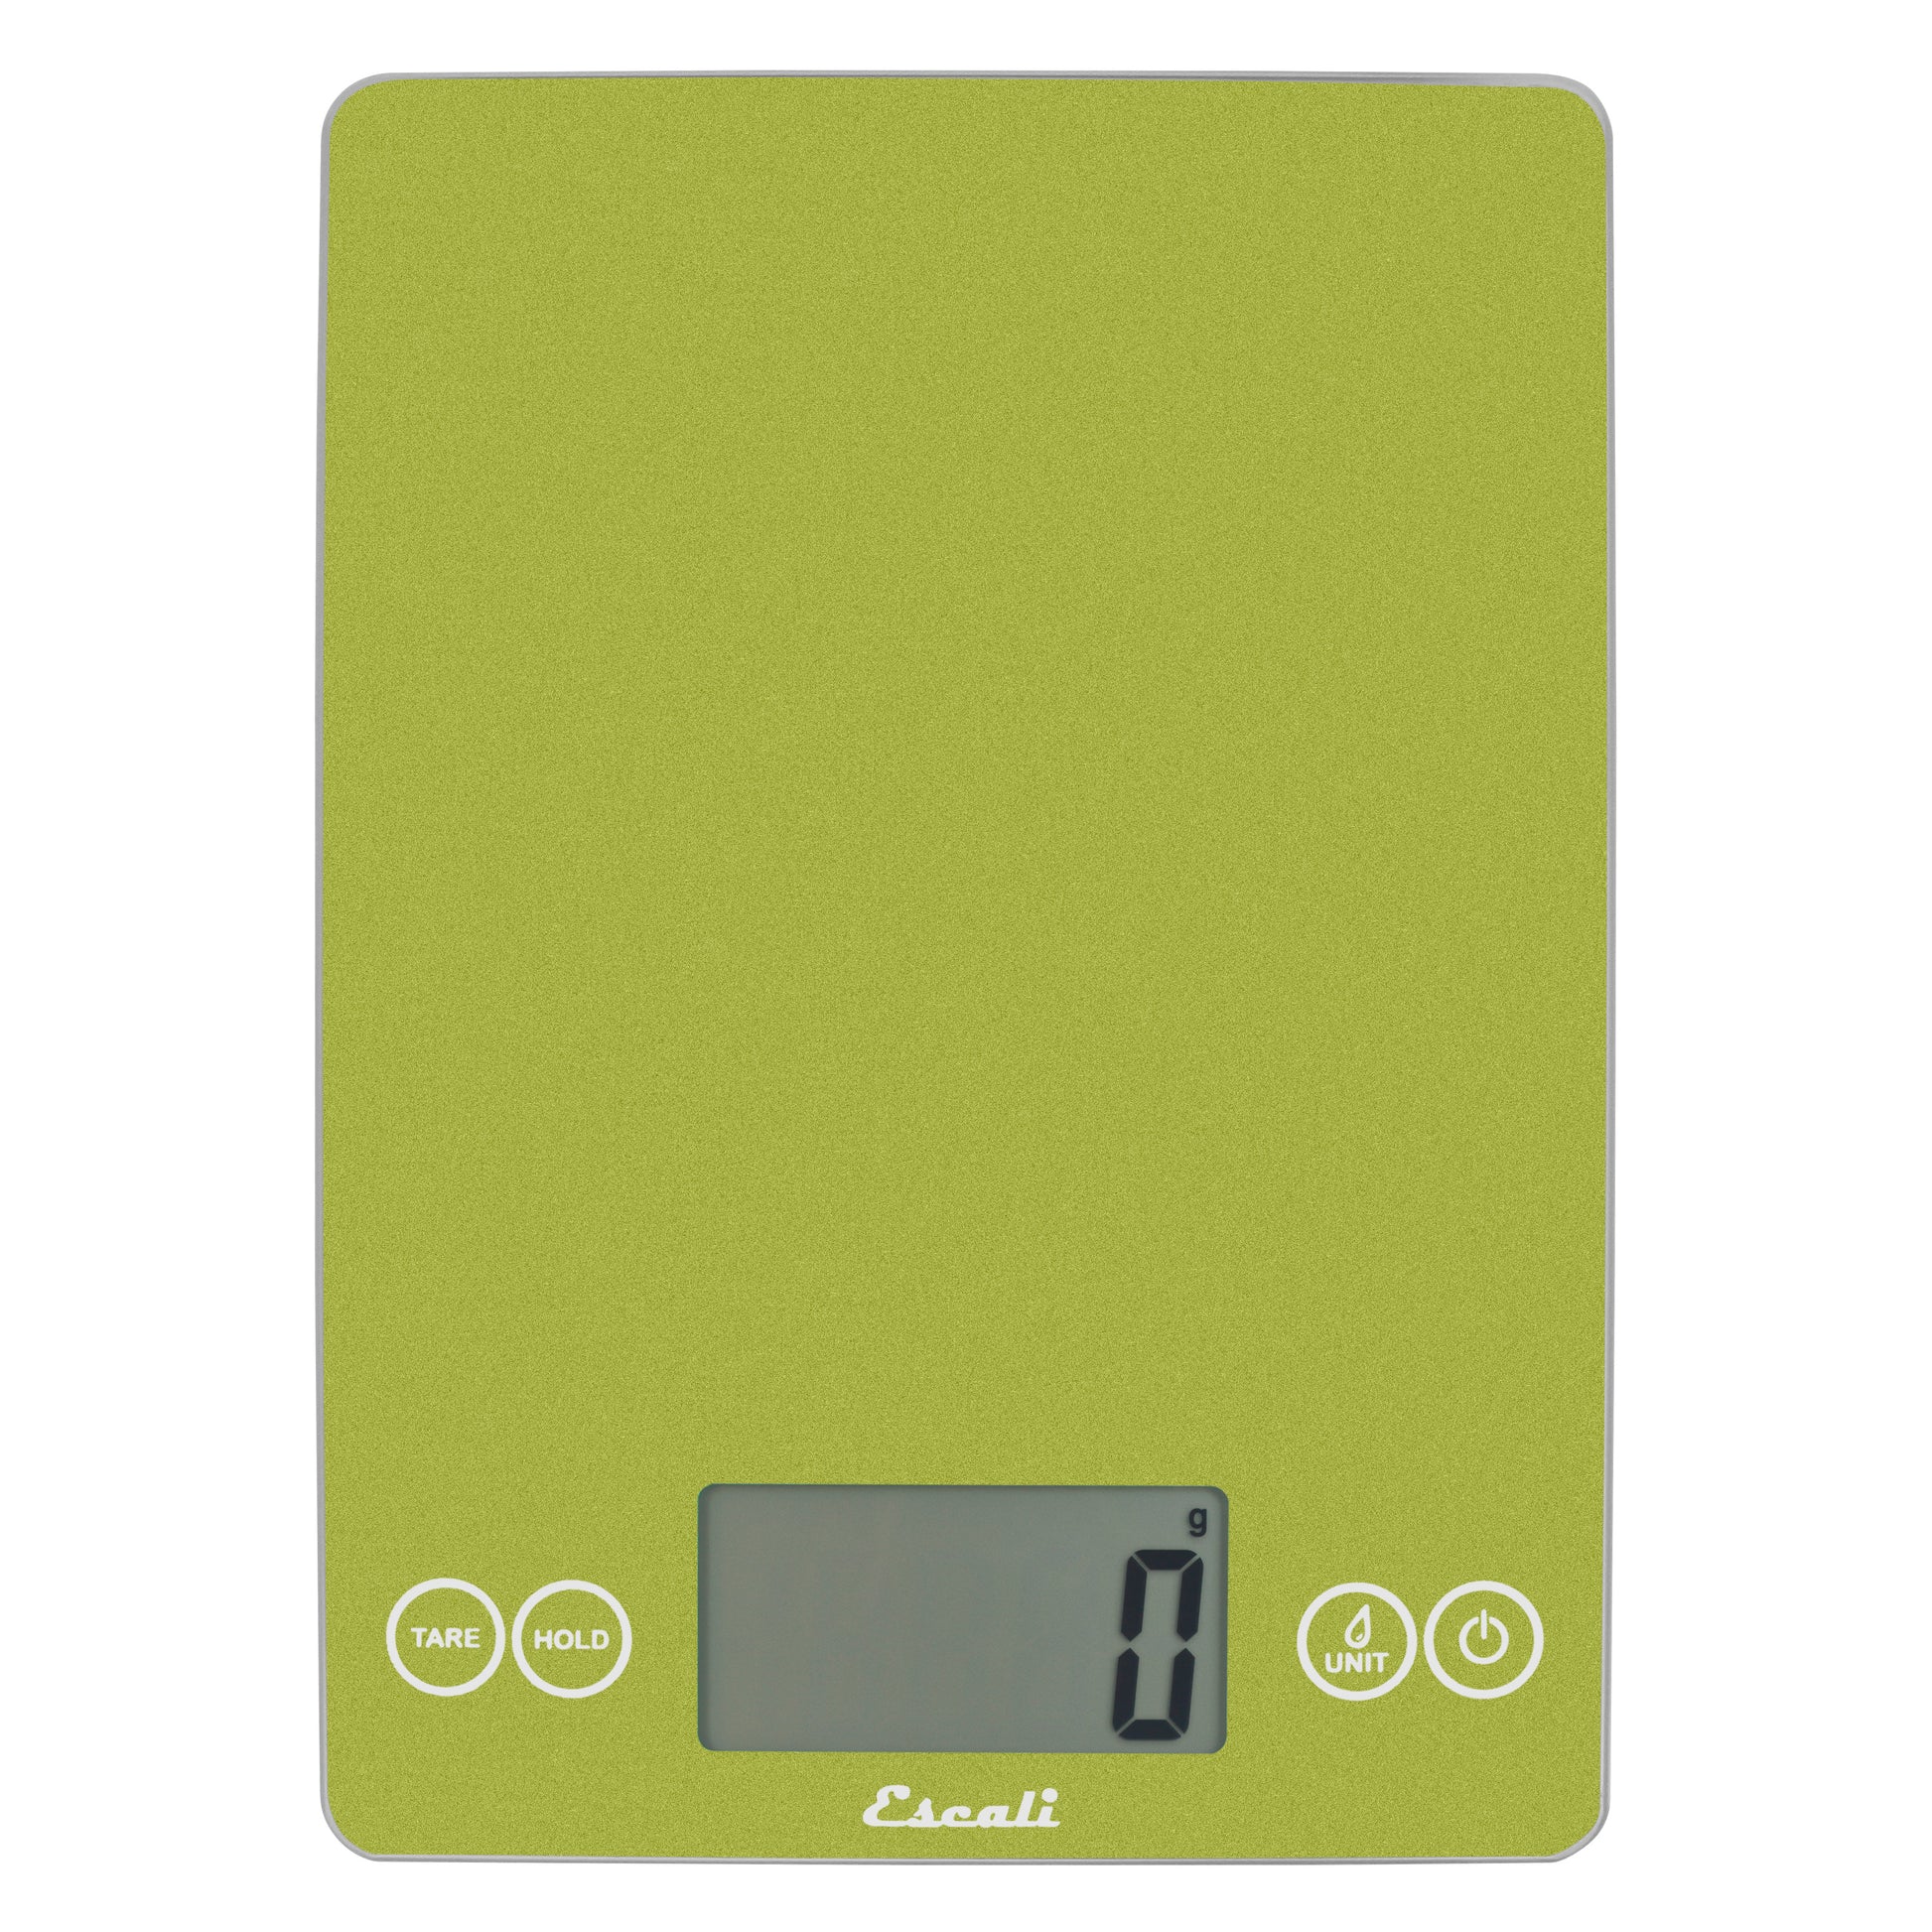 A photo of a succulent green color ARTI Digital Kitchen Scale on a white background.